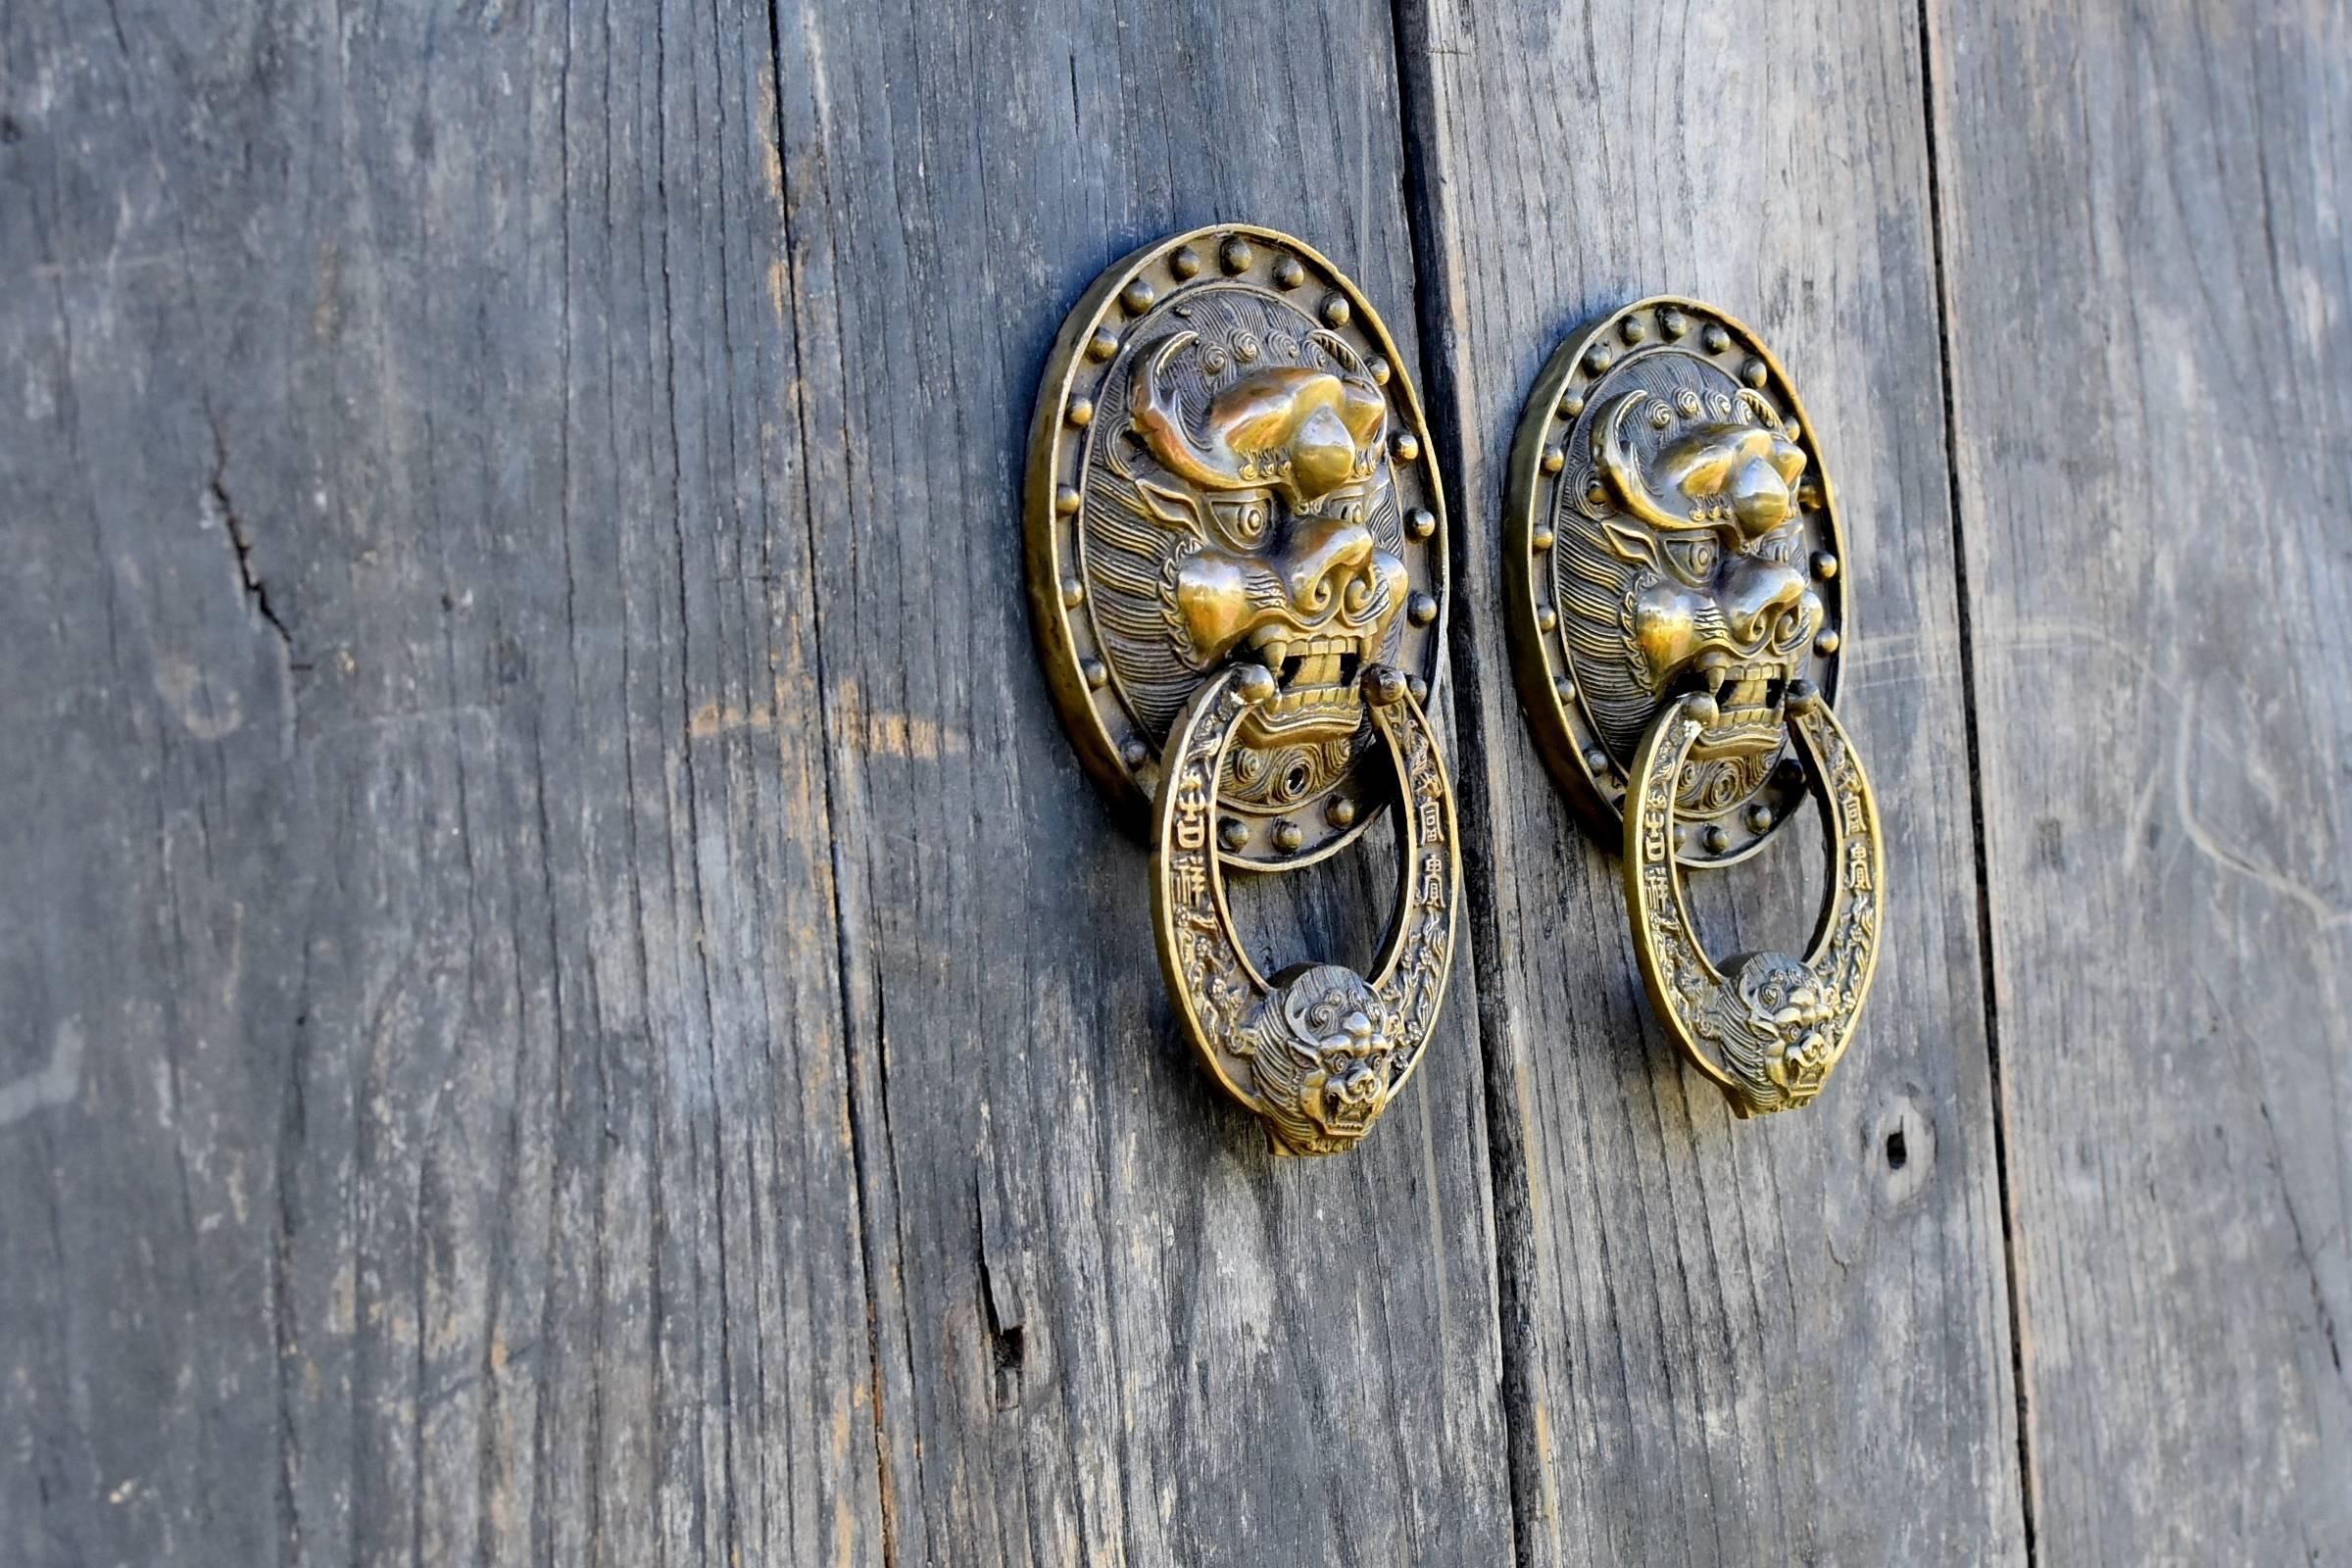 19th Century Rustic Antique Doors with Brass Knockers